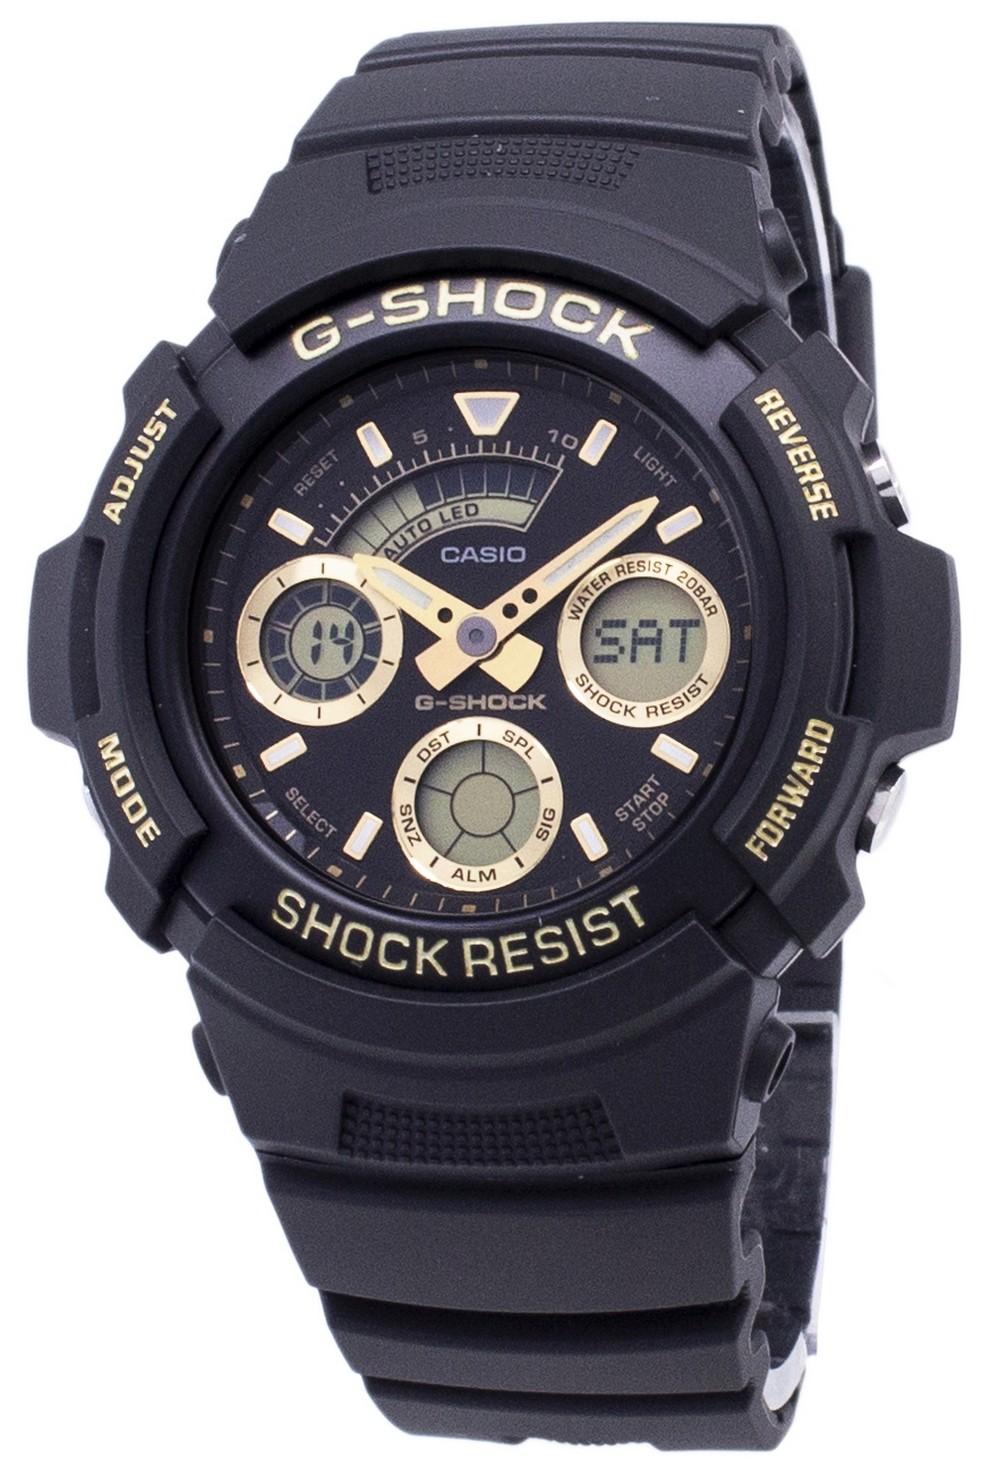 Casio G-Shock Special Color Models AW-591GBX-1A9 Analog Digital 200M Men's Watch